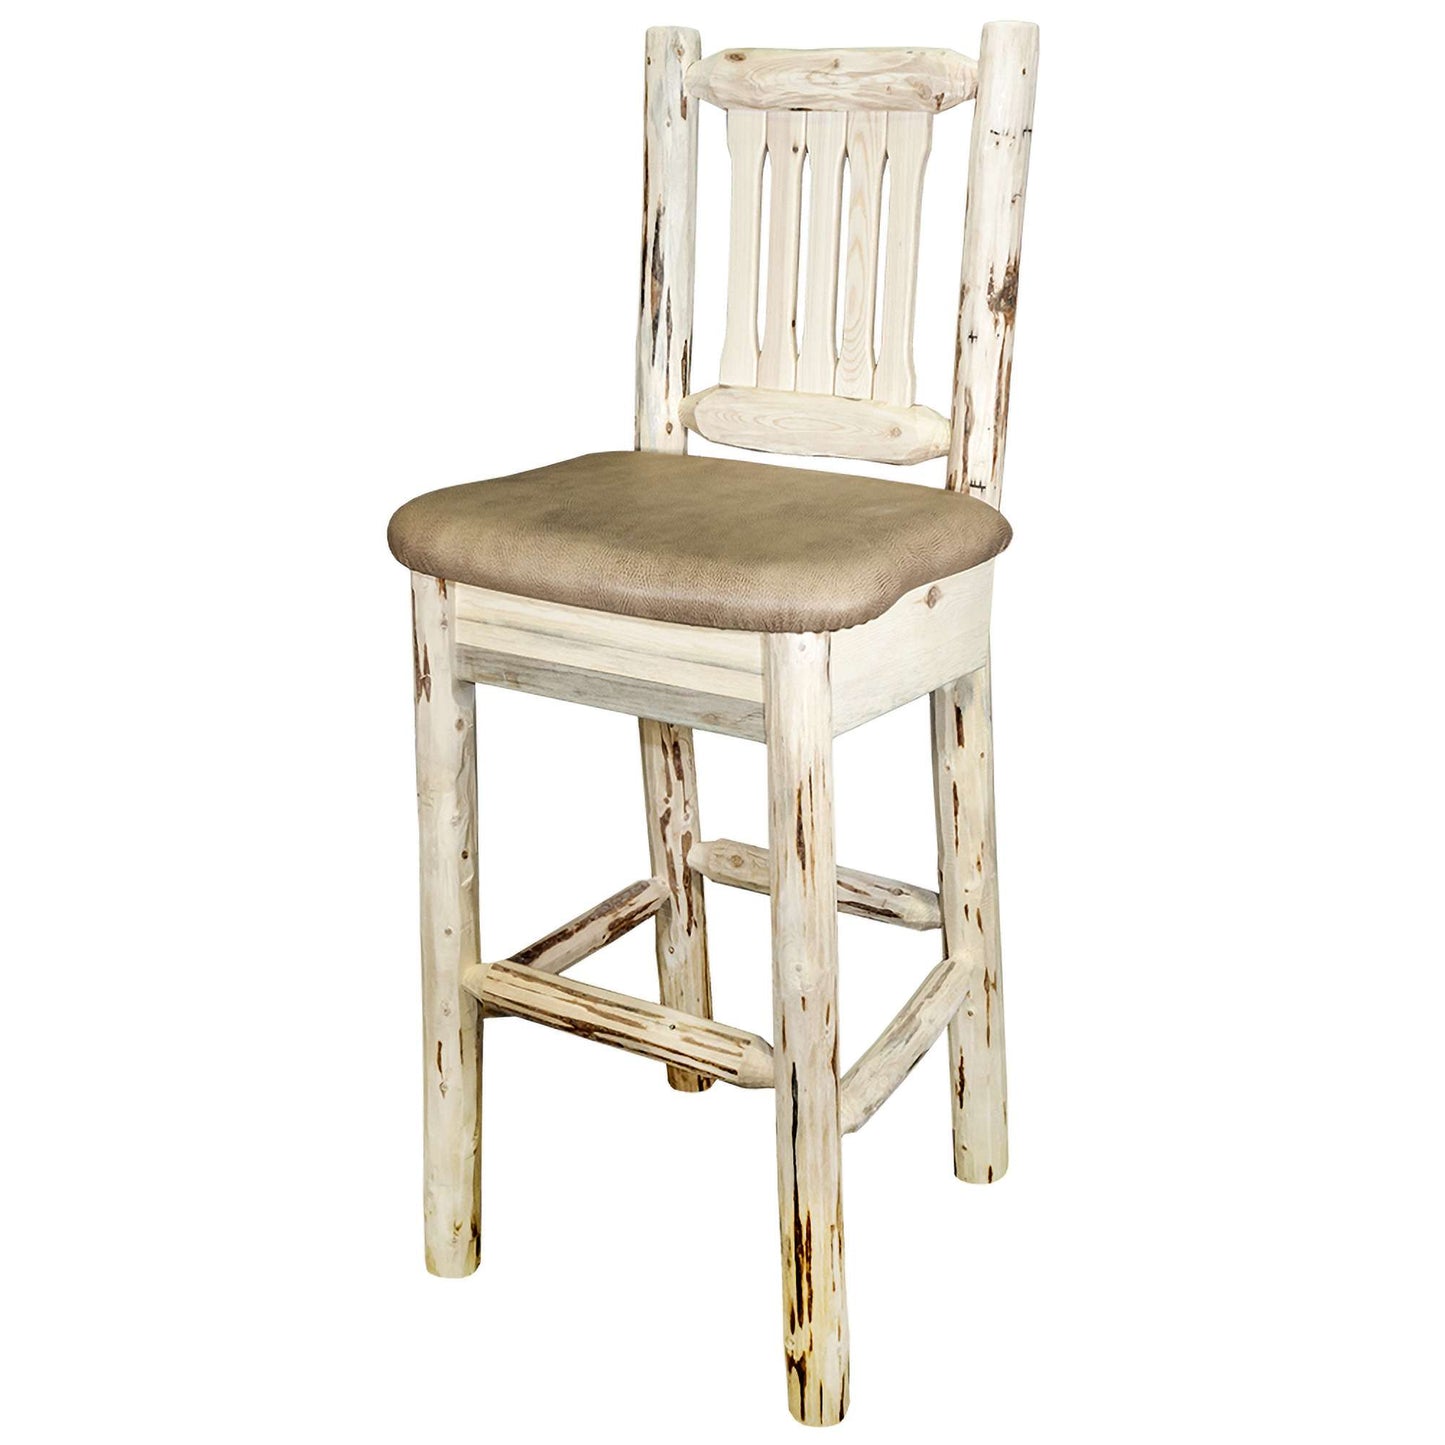 Montana Woodworks - Montana Collection Counter Height Barstool w/ Back - Buckskin Upholstery, Clear Lacquer Finish  - 38 in